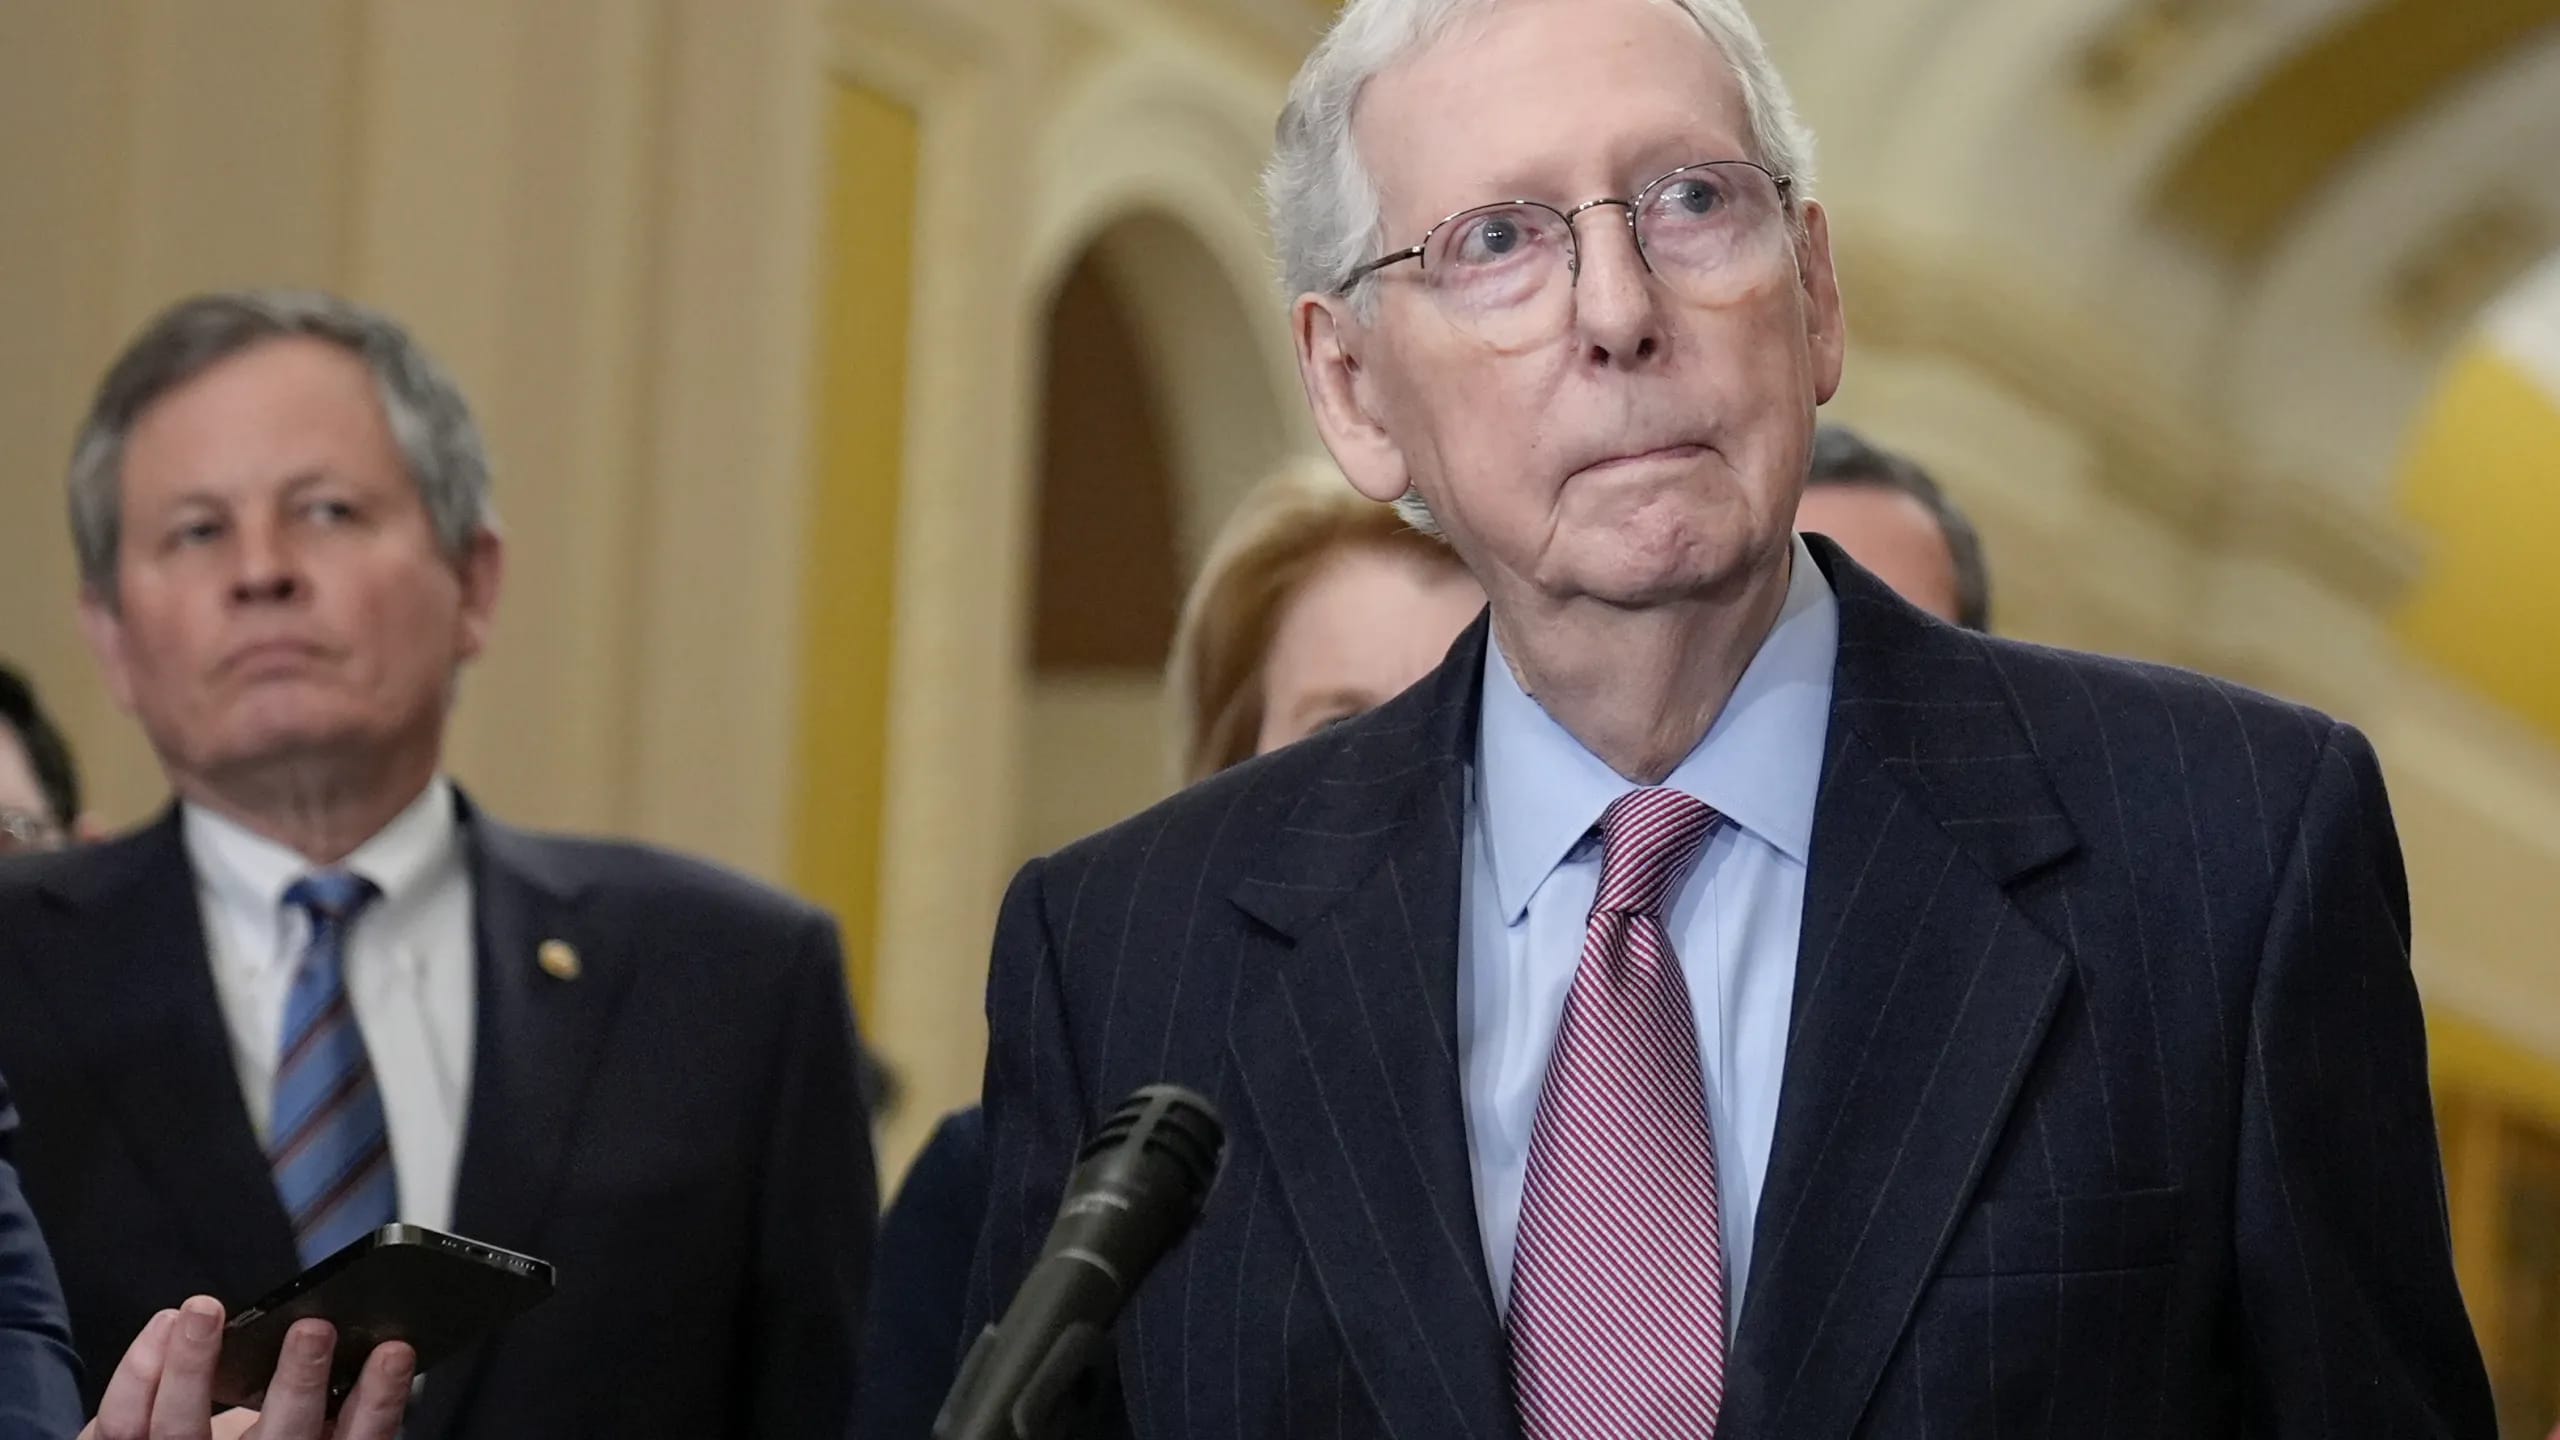 McConnell will step down as the Senate Republican leader